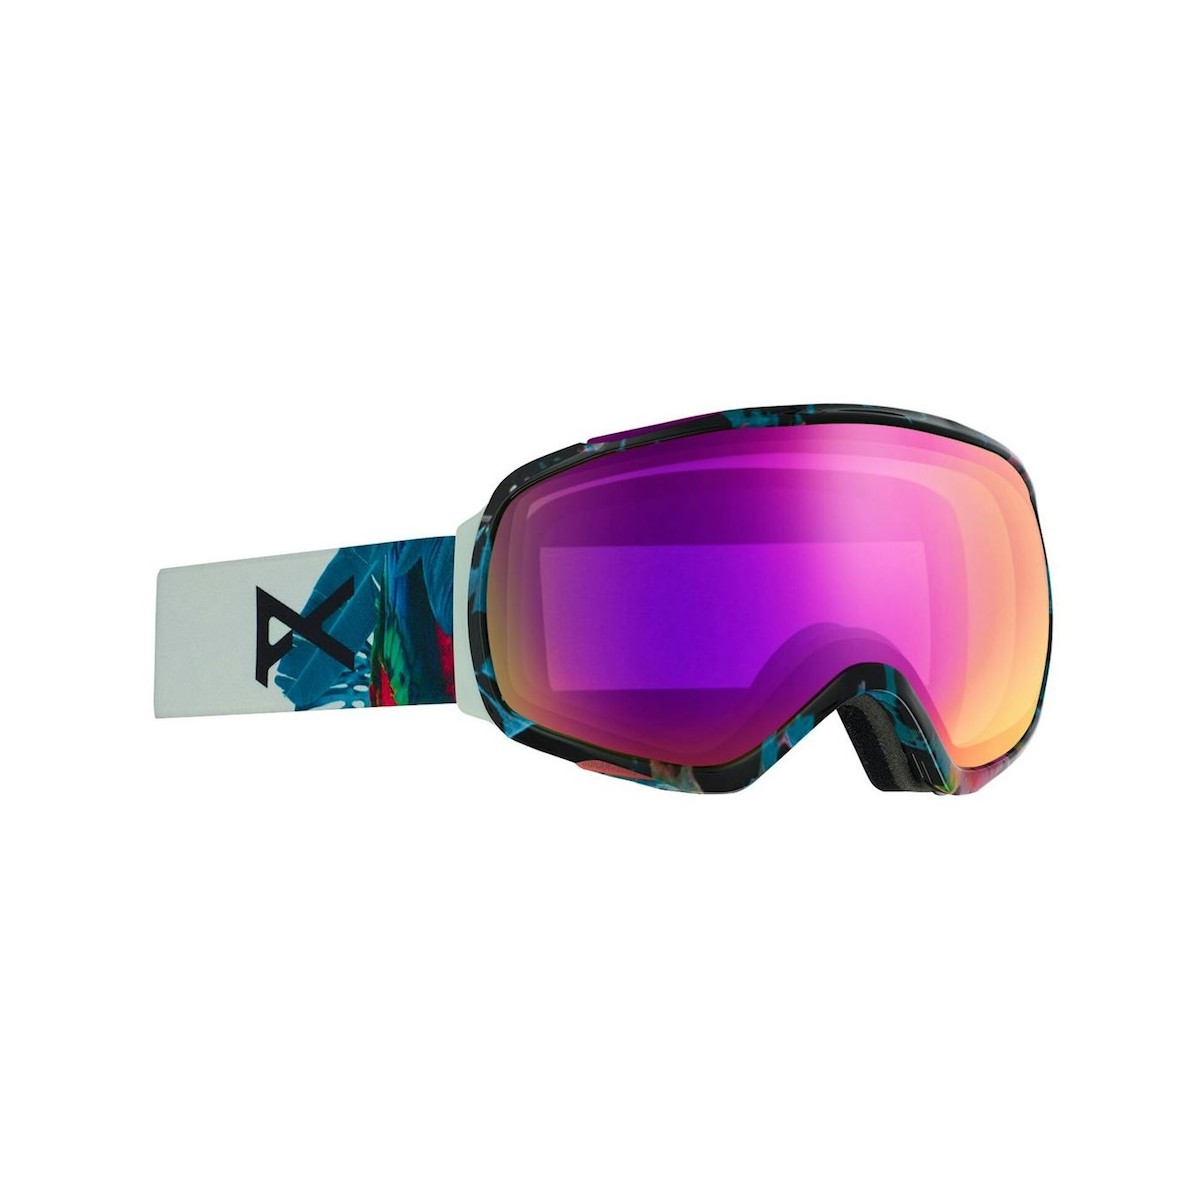 ANON WOMEN'S TEMPEST snow goggles - mfi parrot black w/sonar pink/face mask